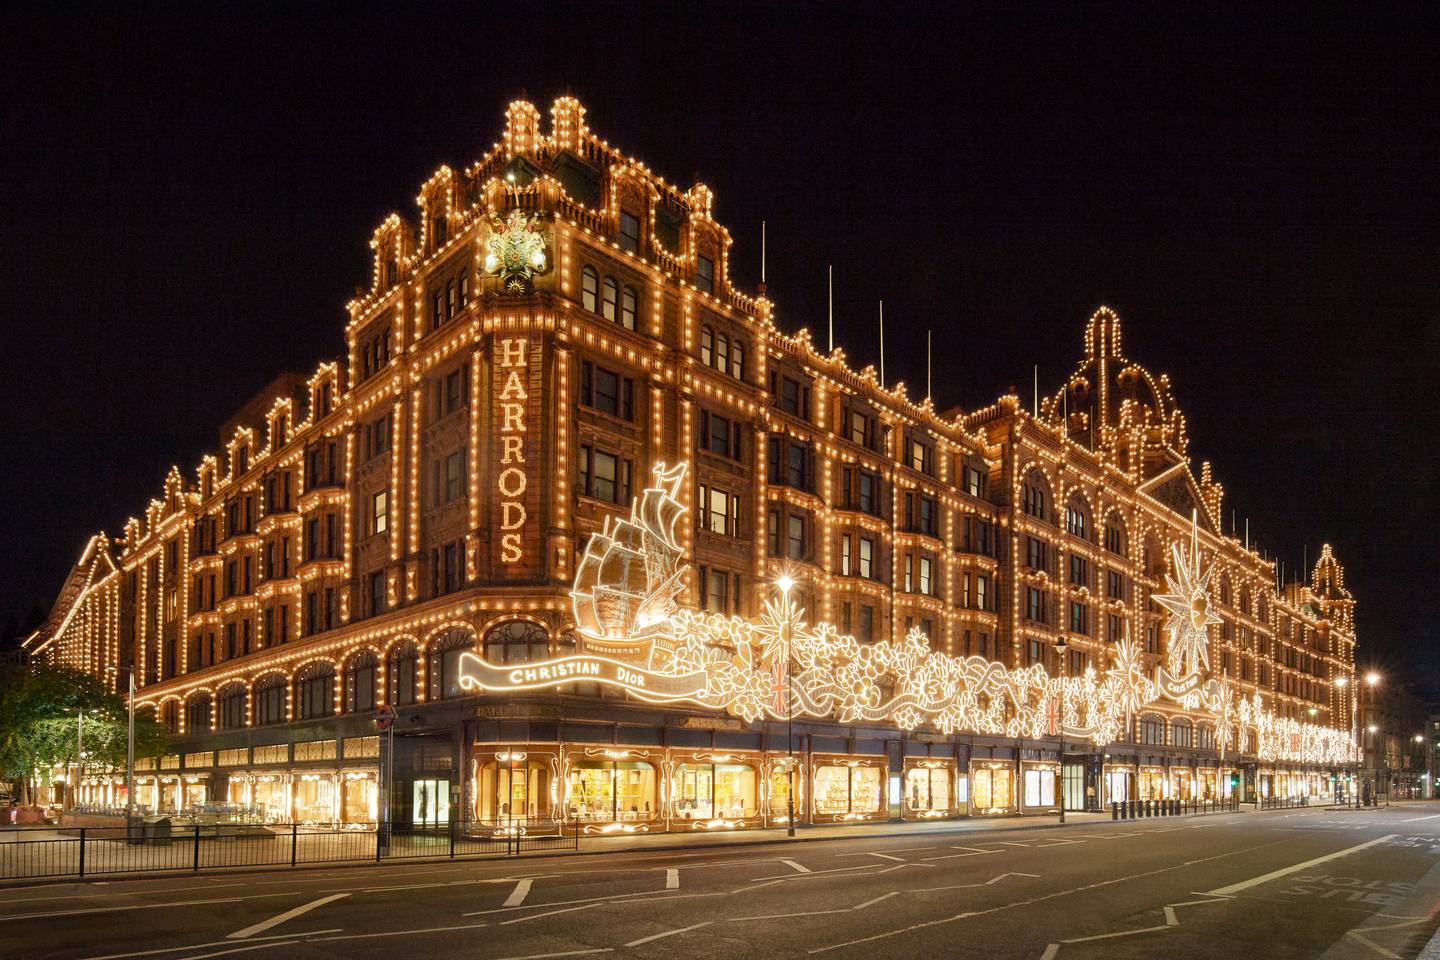 Harrods has been is a popular retail attraction for Middle Eastern visitors in London since the 1970s. Photo: Adrien Dirand